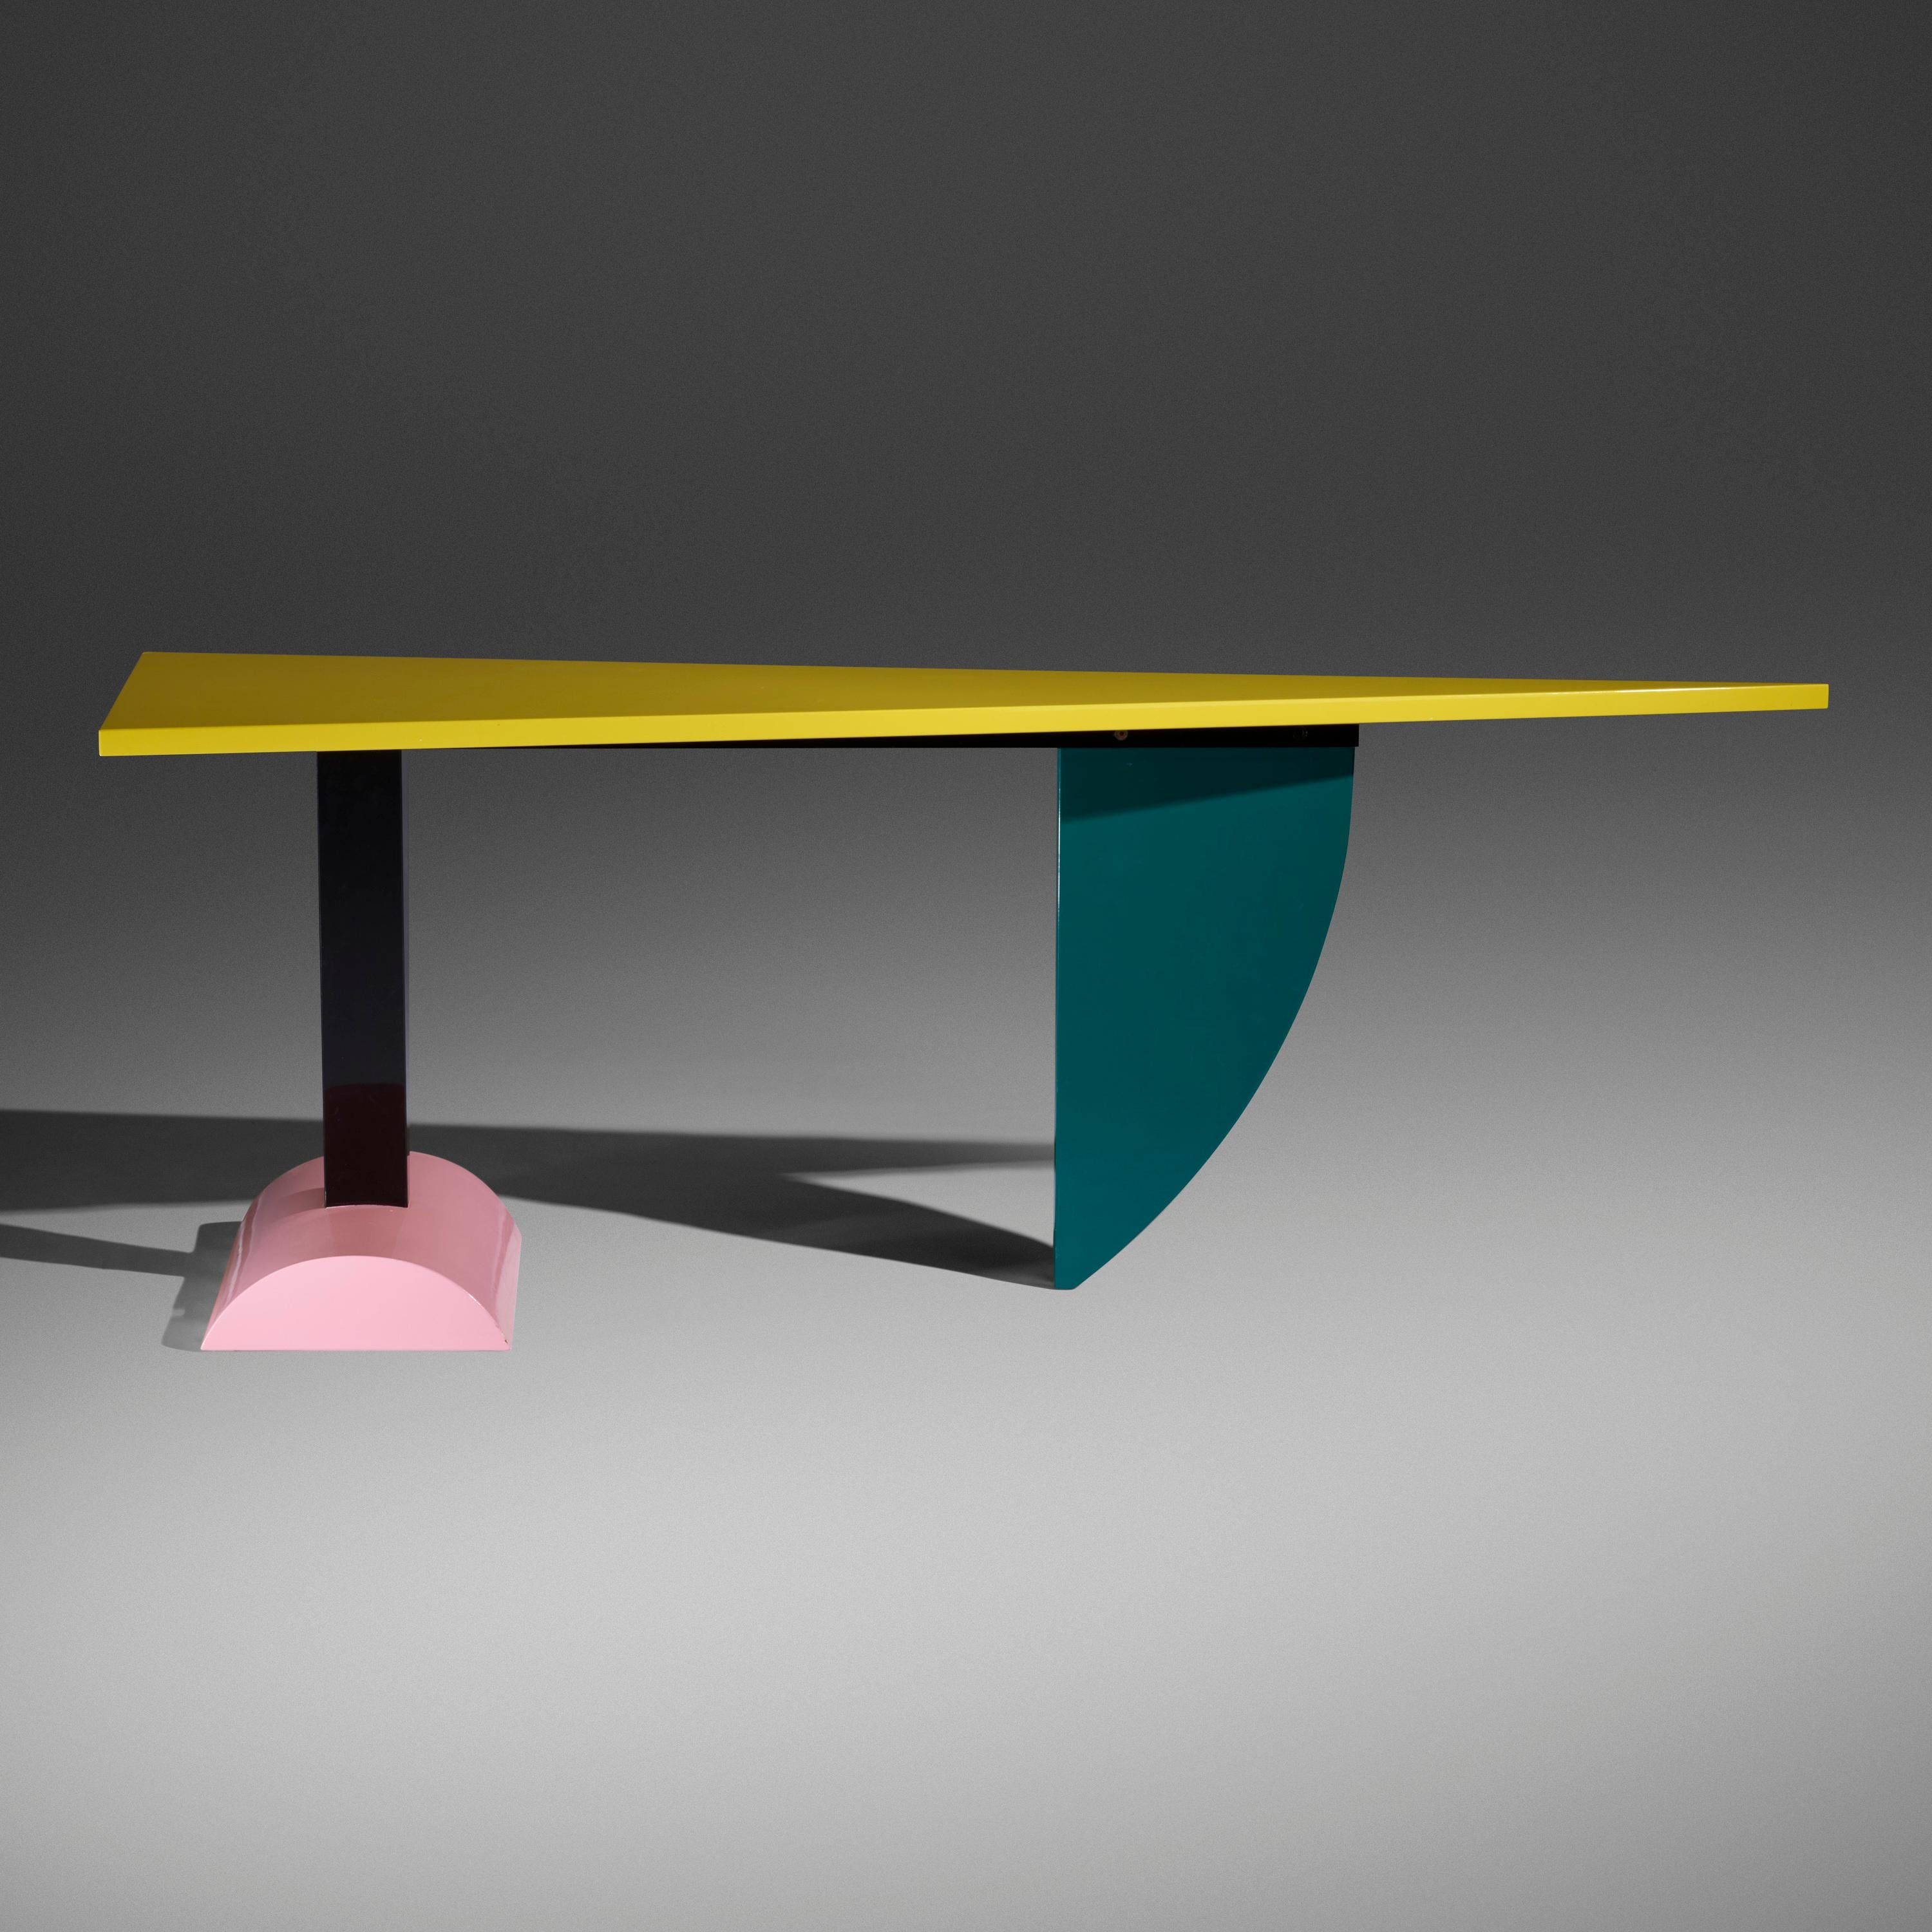 Peter Shire (b. 1947)

An imaginative and dynamic architectural console, dining table, and desk by Peter Shire for Ettore Sottsass' Memphis Group. A striking interplay of geometric forms in lacquered wood, this asymmetric, multi-purpose piece